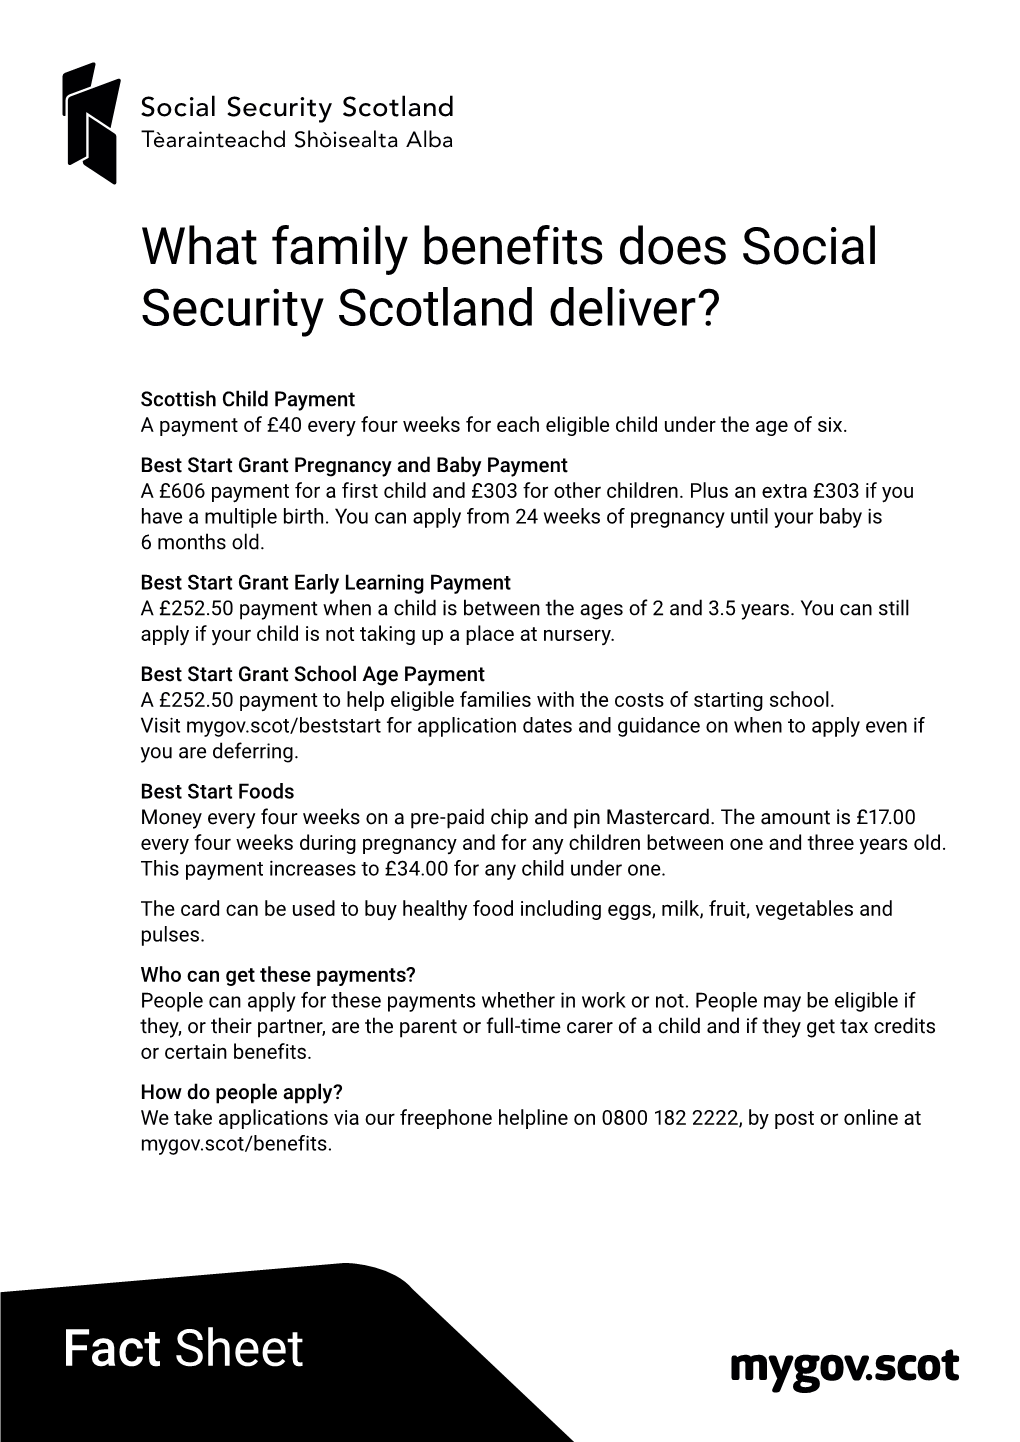 Fact Sheet What Family Benefits Does Social Security Scotland Deliver?